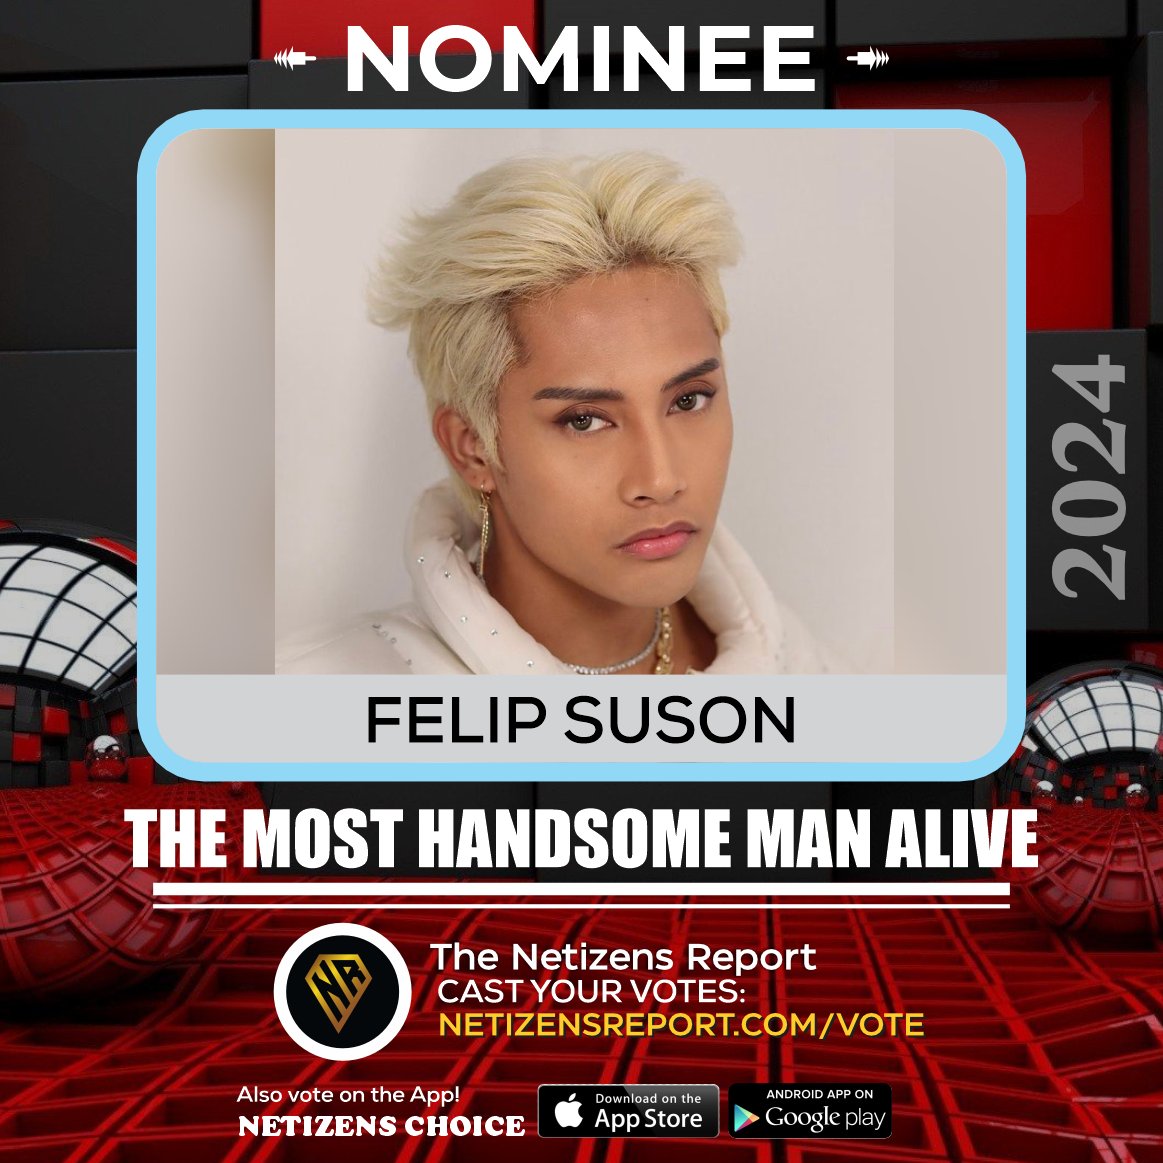 (THE MOST HANDSOME MAN ALIVE 2024) #MHMA2024 Who Is The World's Most Charming And Attractive Male Celebrity Of 2024? VOTE: vote.netizenschoice.com/poll/65ae34a95… #MHMA2024 #Felix #winmetawin #SUGA #FELIPSUSON APP: IOS: apple.co/3DiK6t6 Android: bit.ly/3FzpT5k